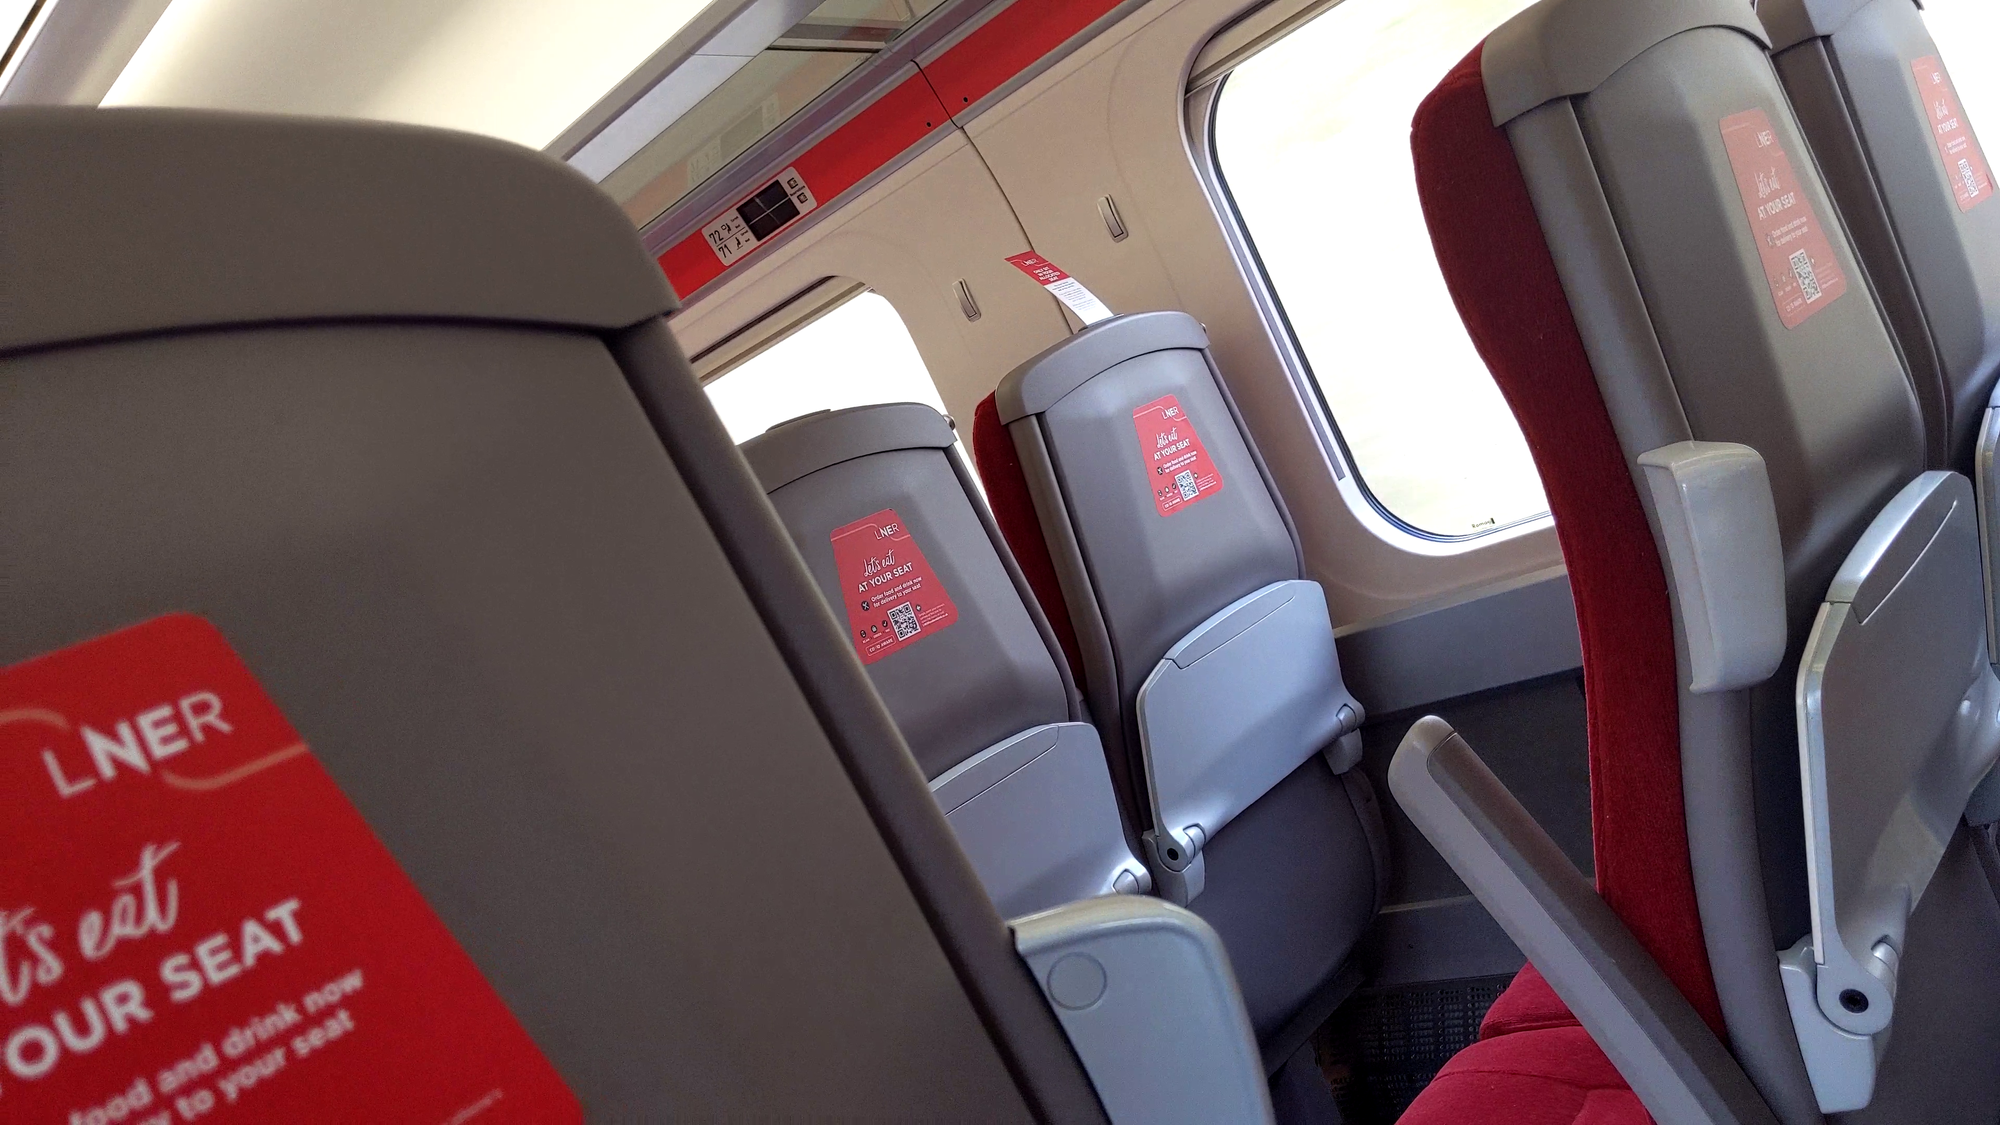 Seats in standard class are plastic on the back with a deep red moquette. On the backs of the airline-style seats are fold-down tables that could hold a few small items. Above seats are glass luggage racks which you can see through.